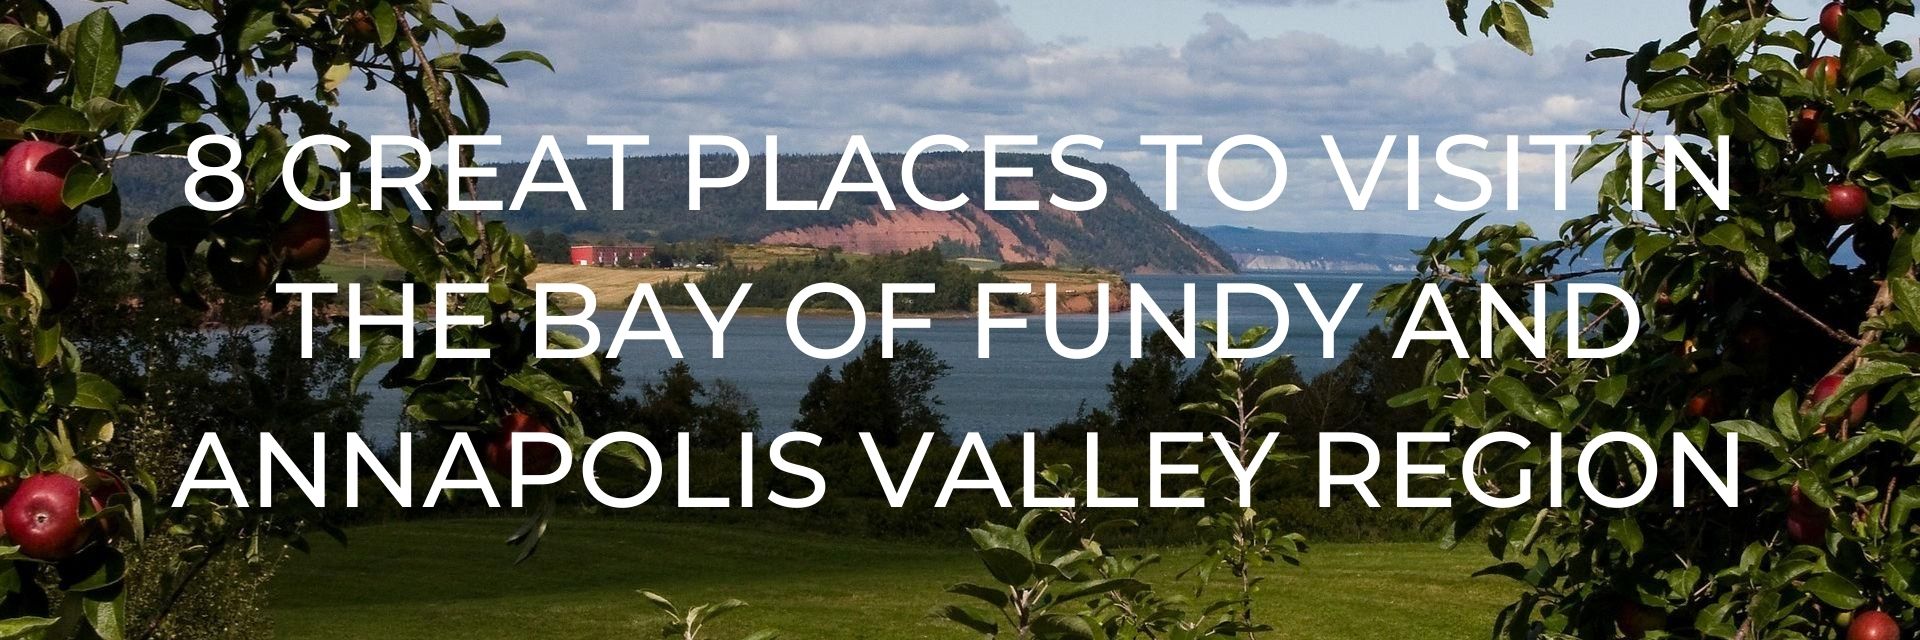 8 Great Places to Visit in the Bay of Fundy and Annapolis Valley Region Desktop Header